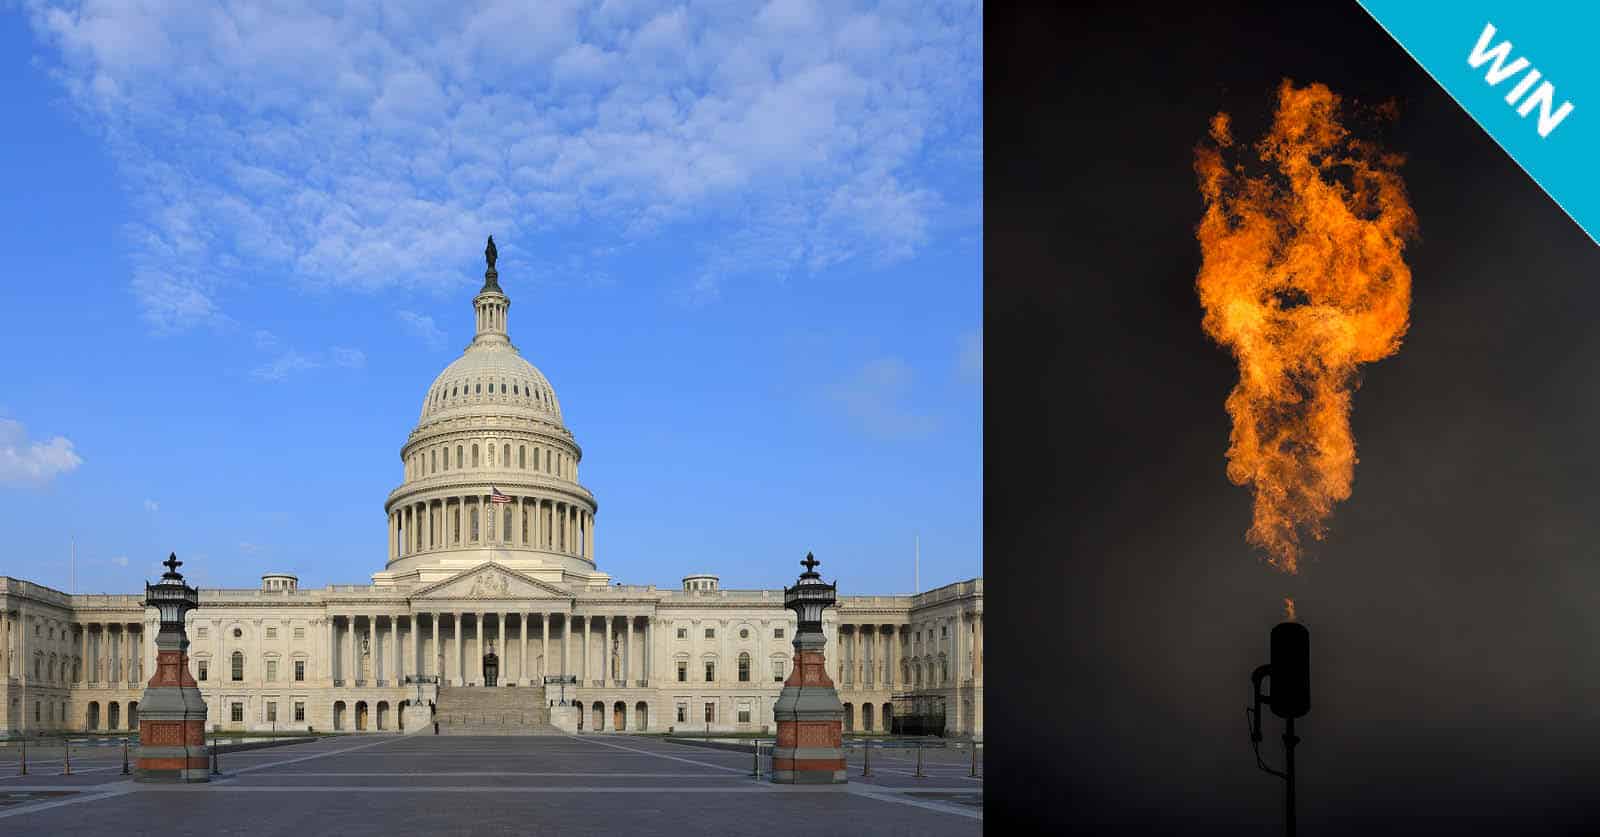 Taxpayers Win With Senate's Refusal to use CRA on Methane Waste Rule